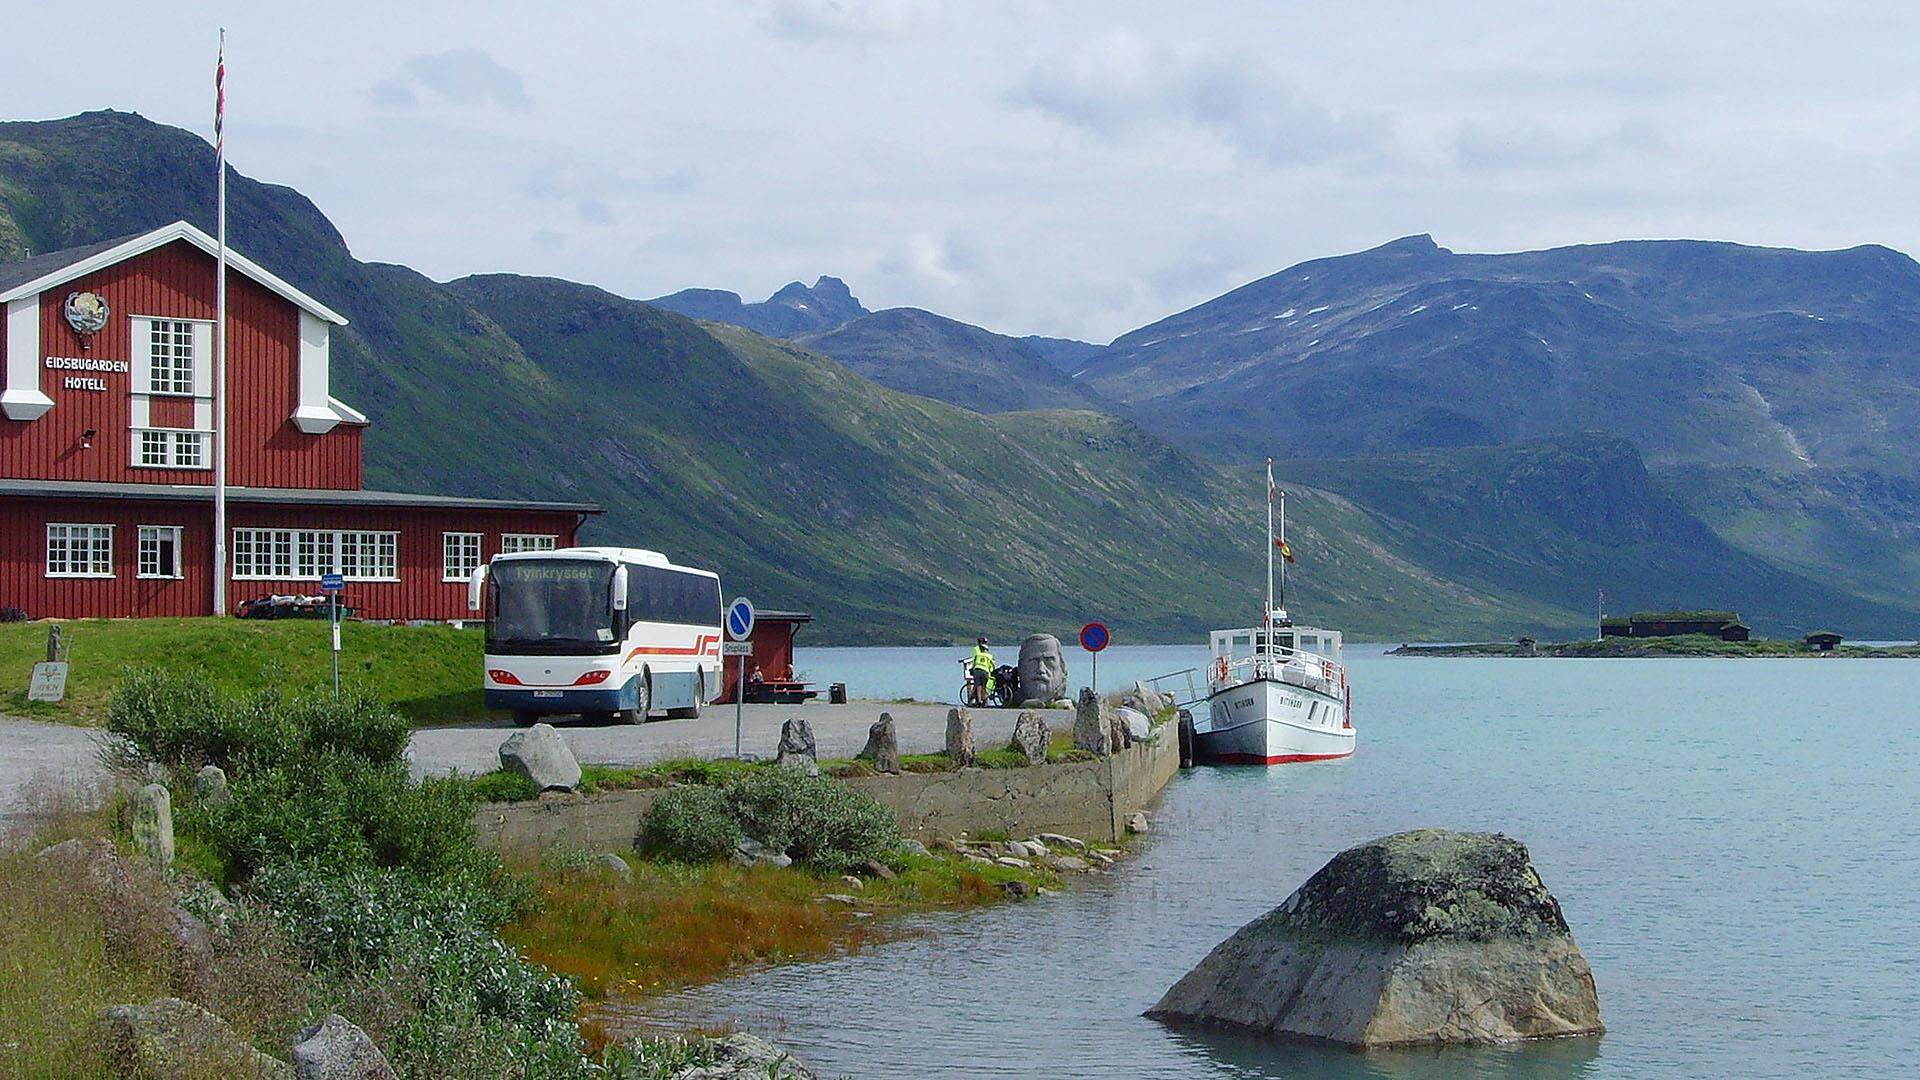 A historic passenger boat on a turquoise mountain lake, a bus on the quay, a red wooden hotel and several twothousand-meter-summits in the background.